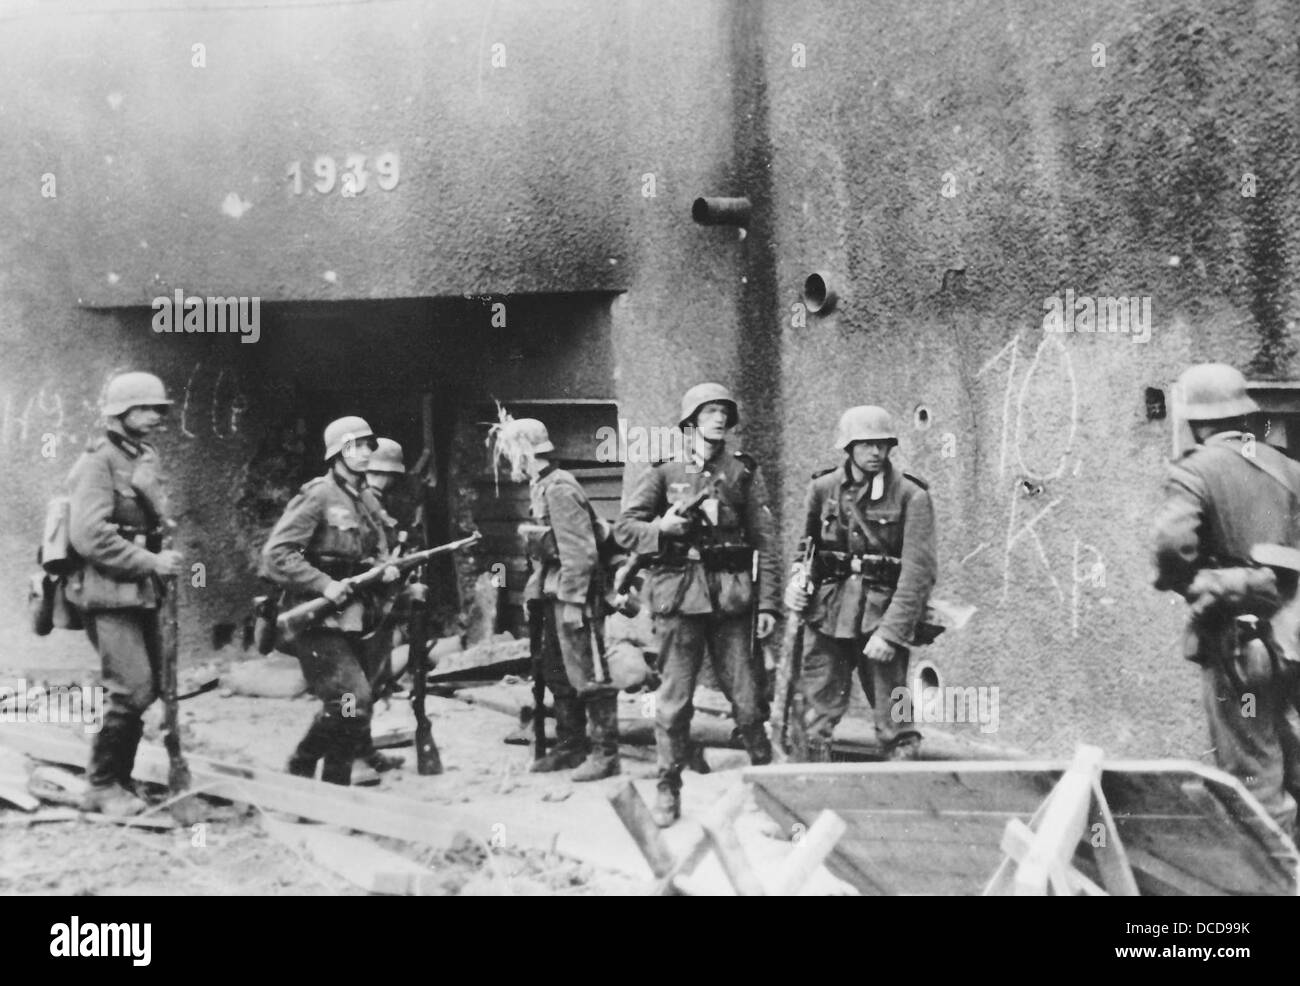 Members of the German Wehrmacht are pictured at the German-Franch border after the attack on France in 1940. Fotoarchiv für Zeitgeschichte Stock Photo